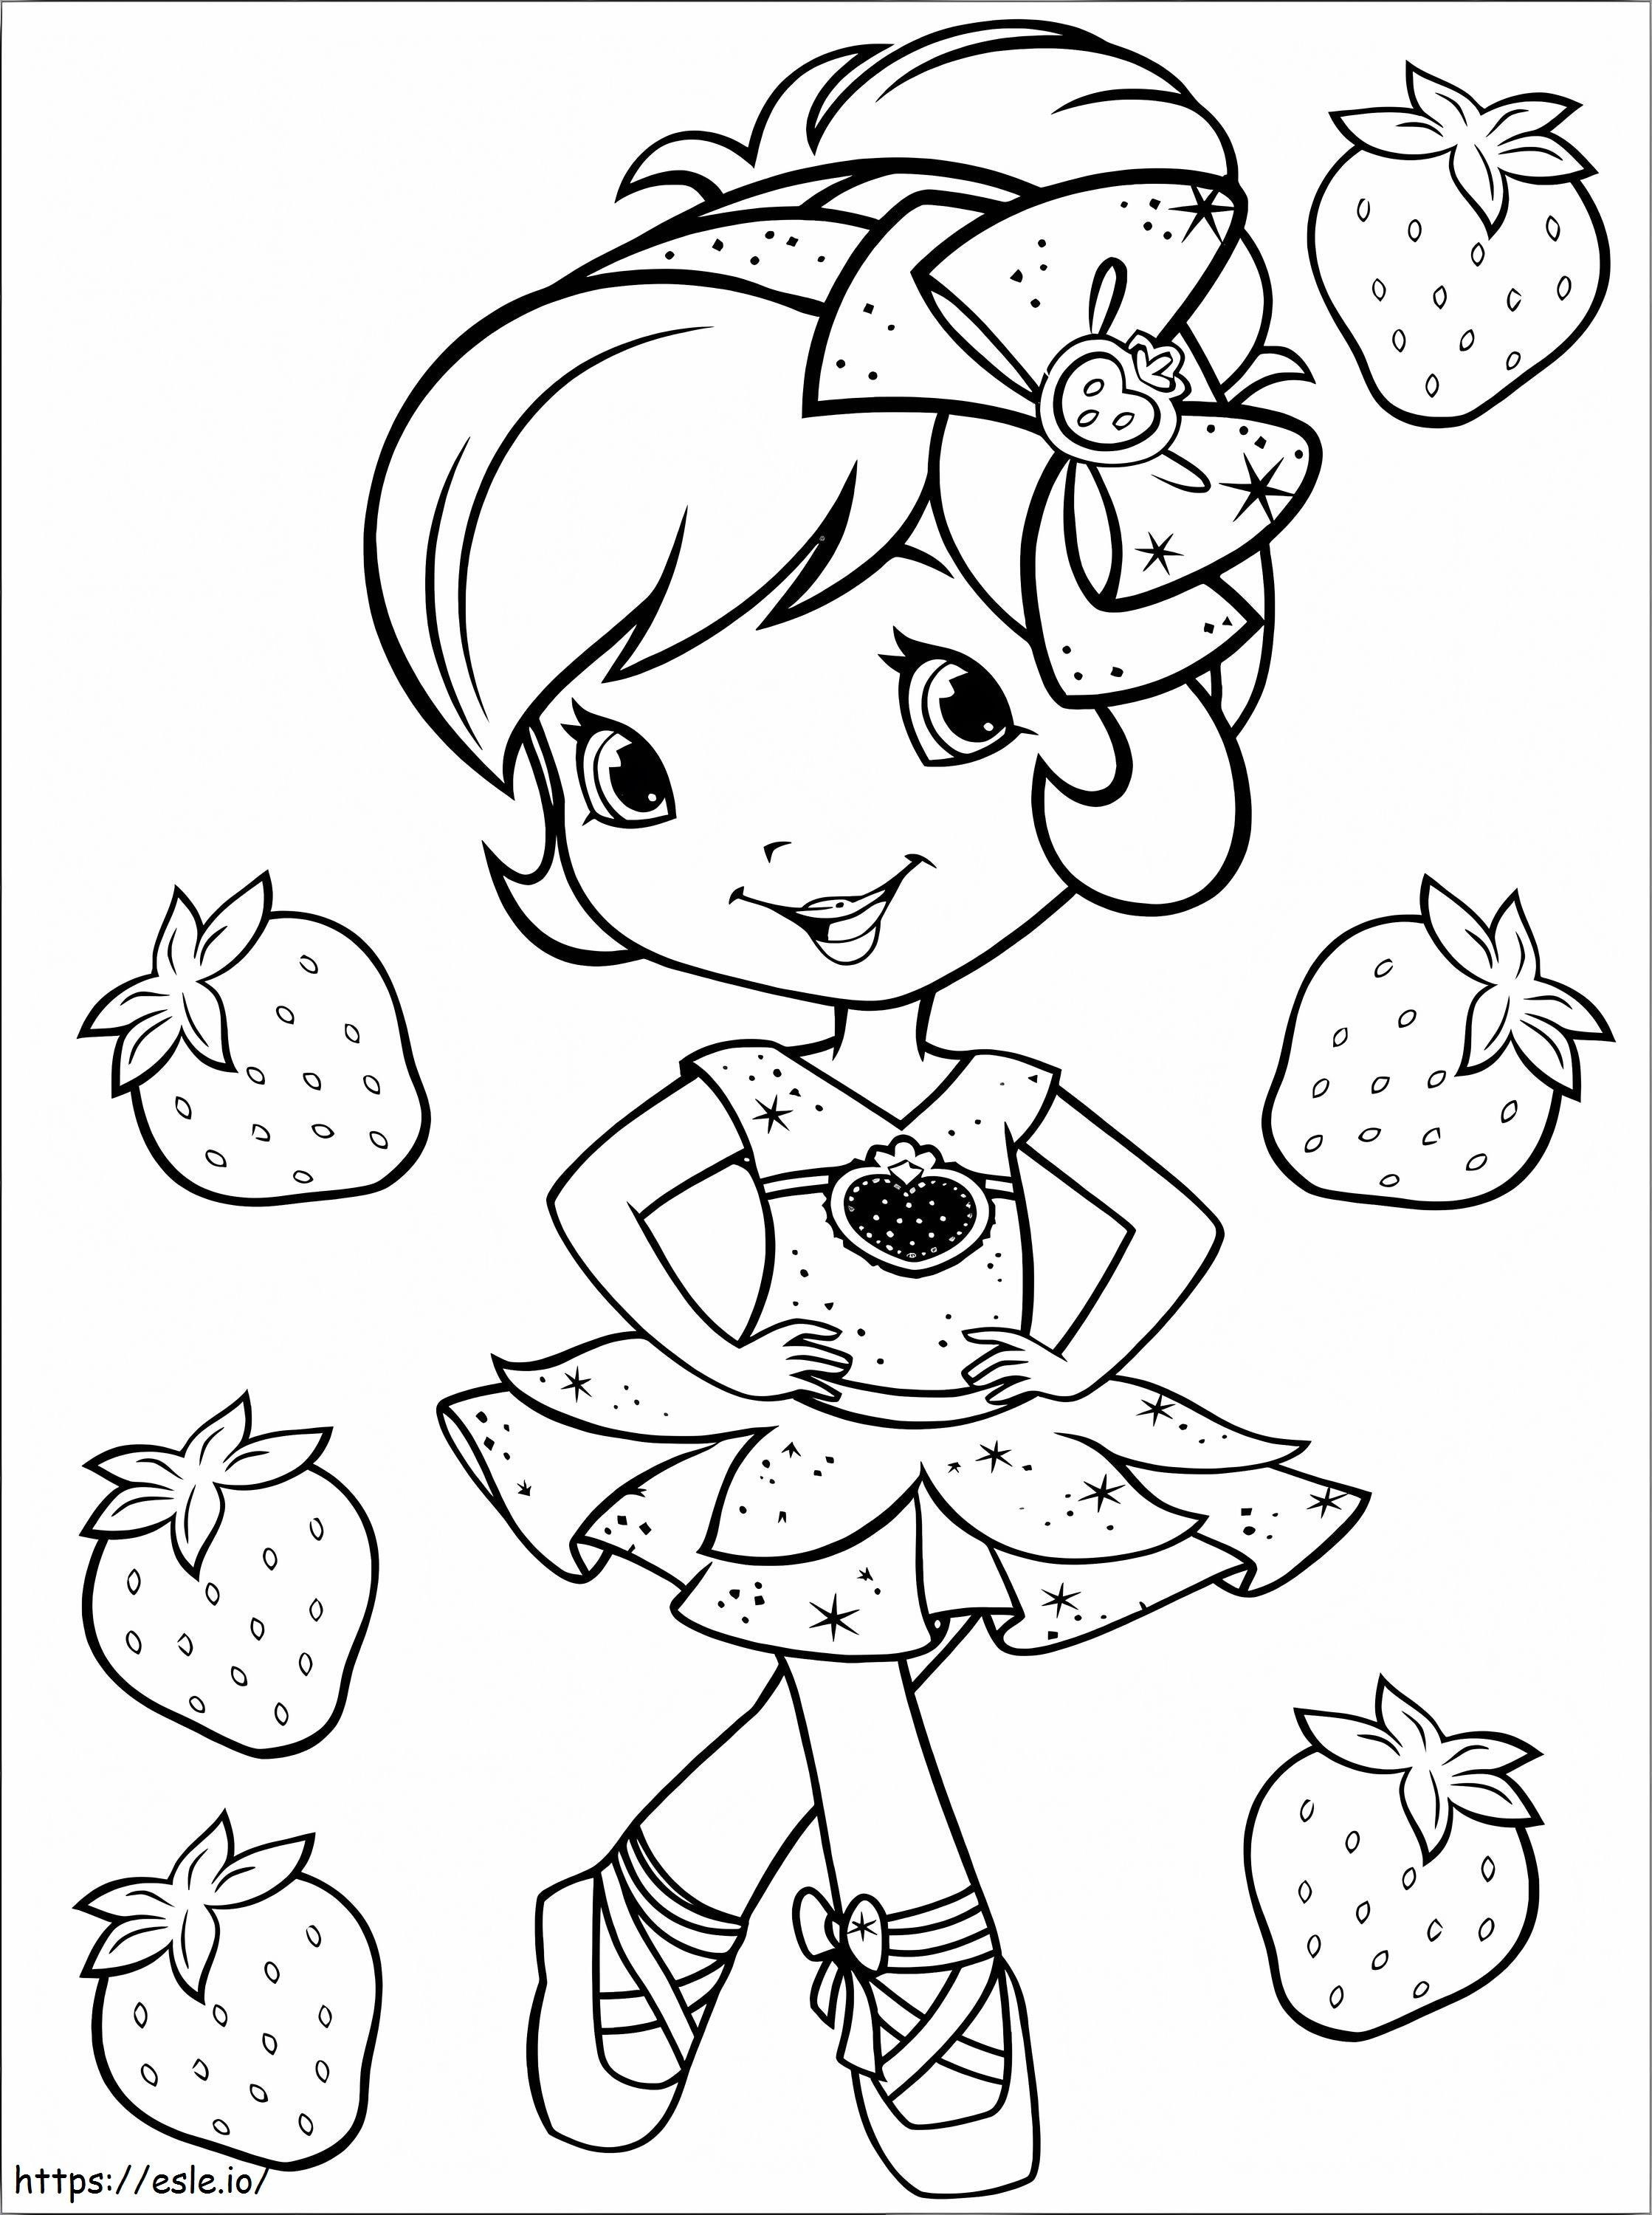 Strawberry Shortcake With Strawberries coloring page